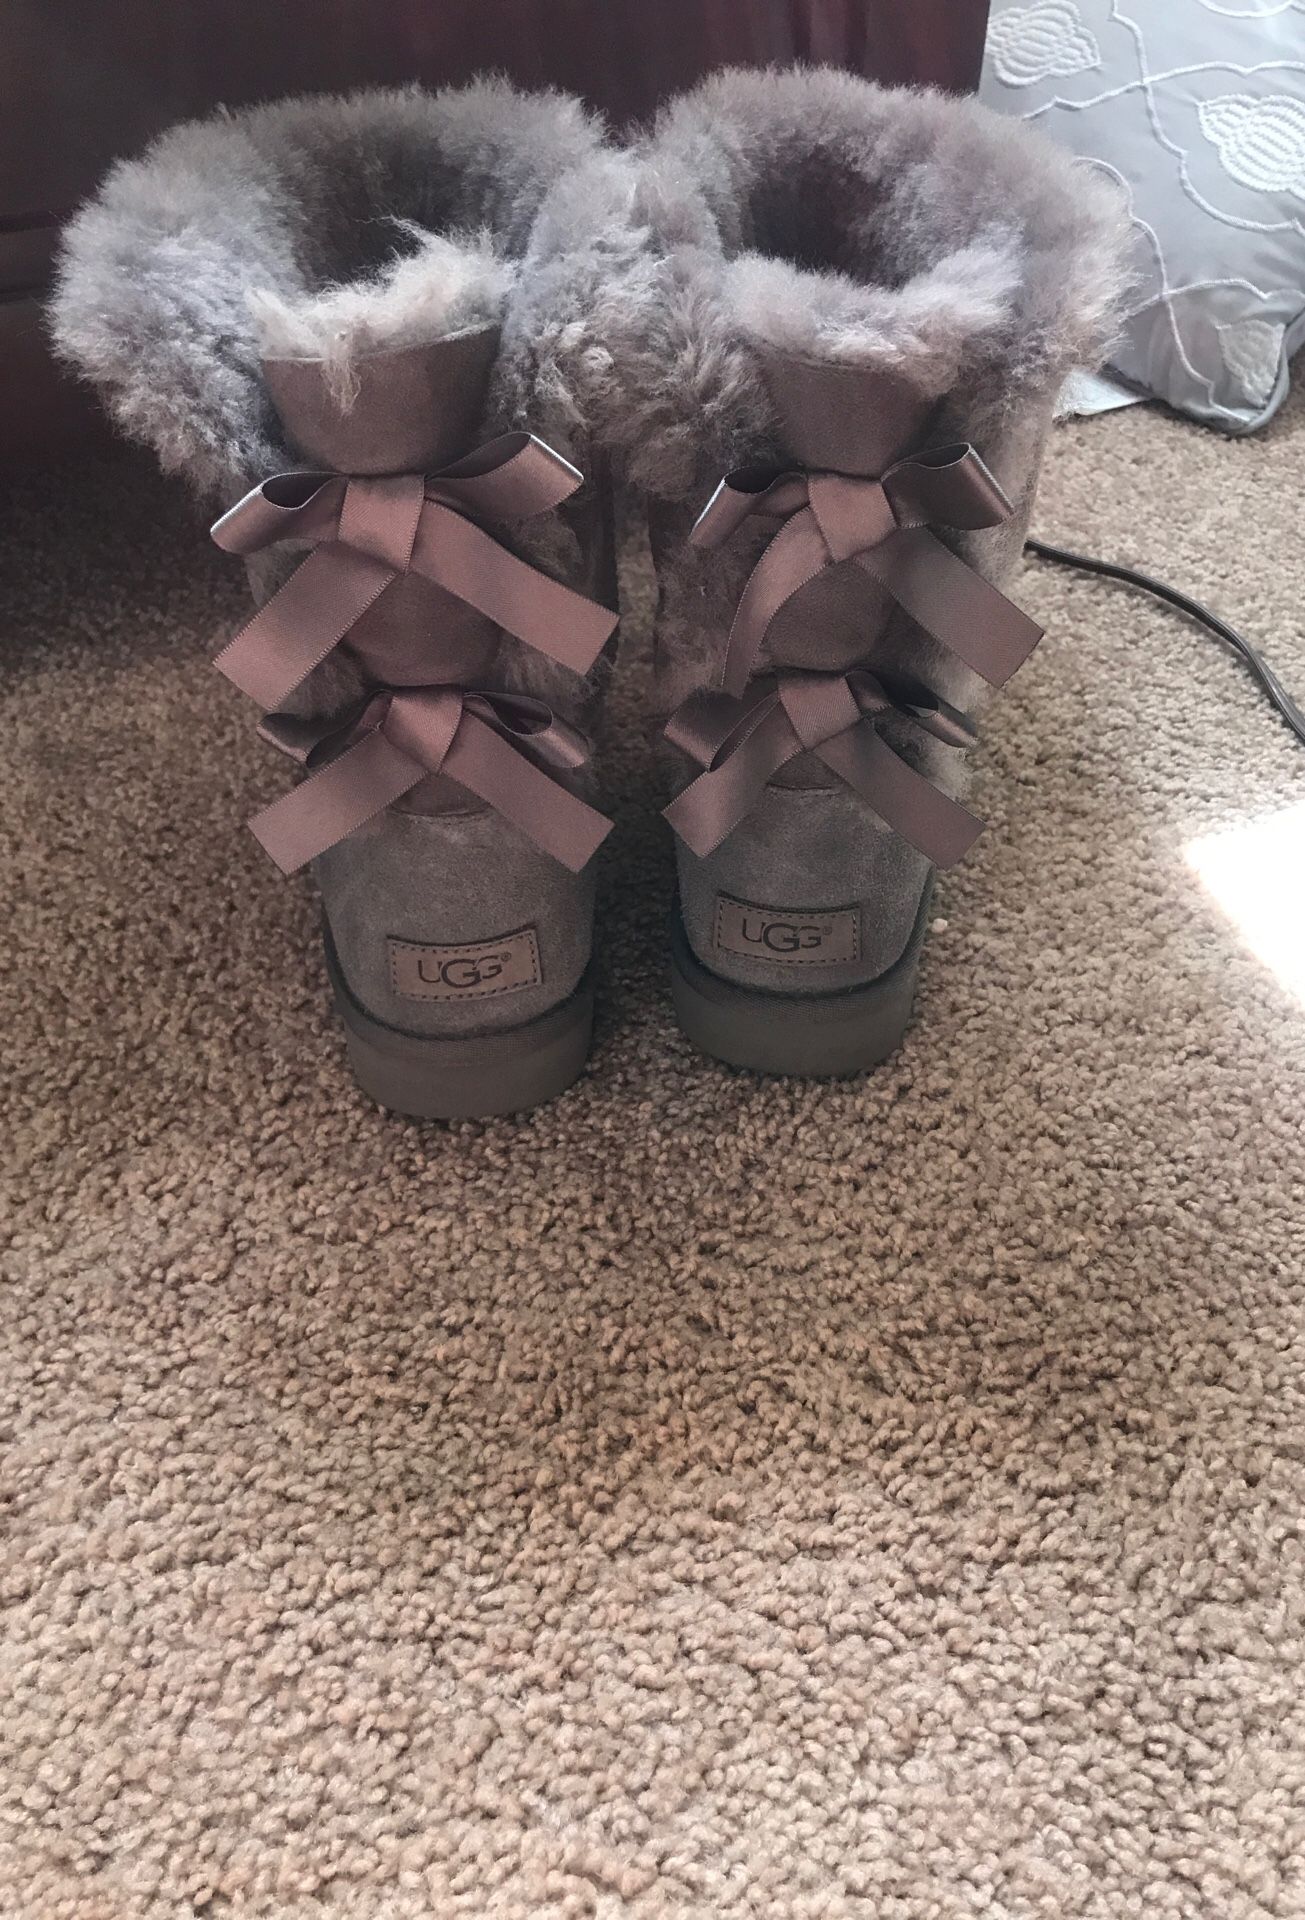 Uggs size 7